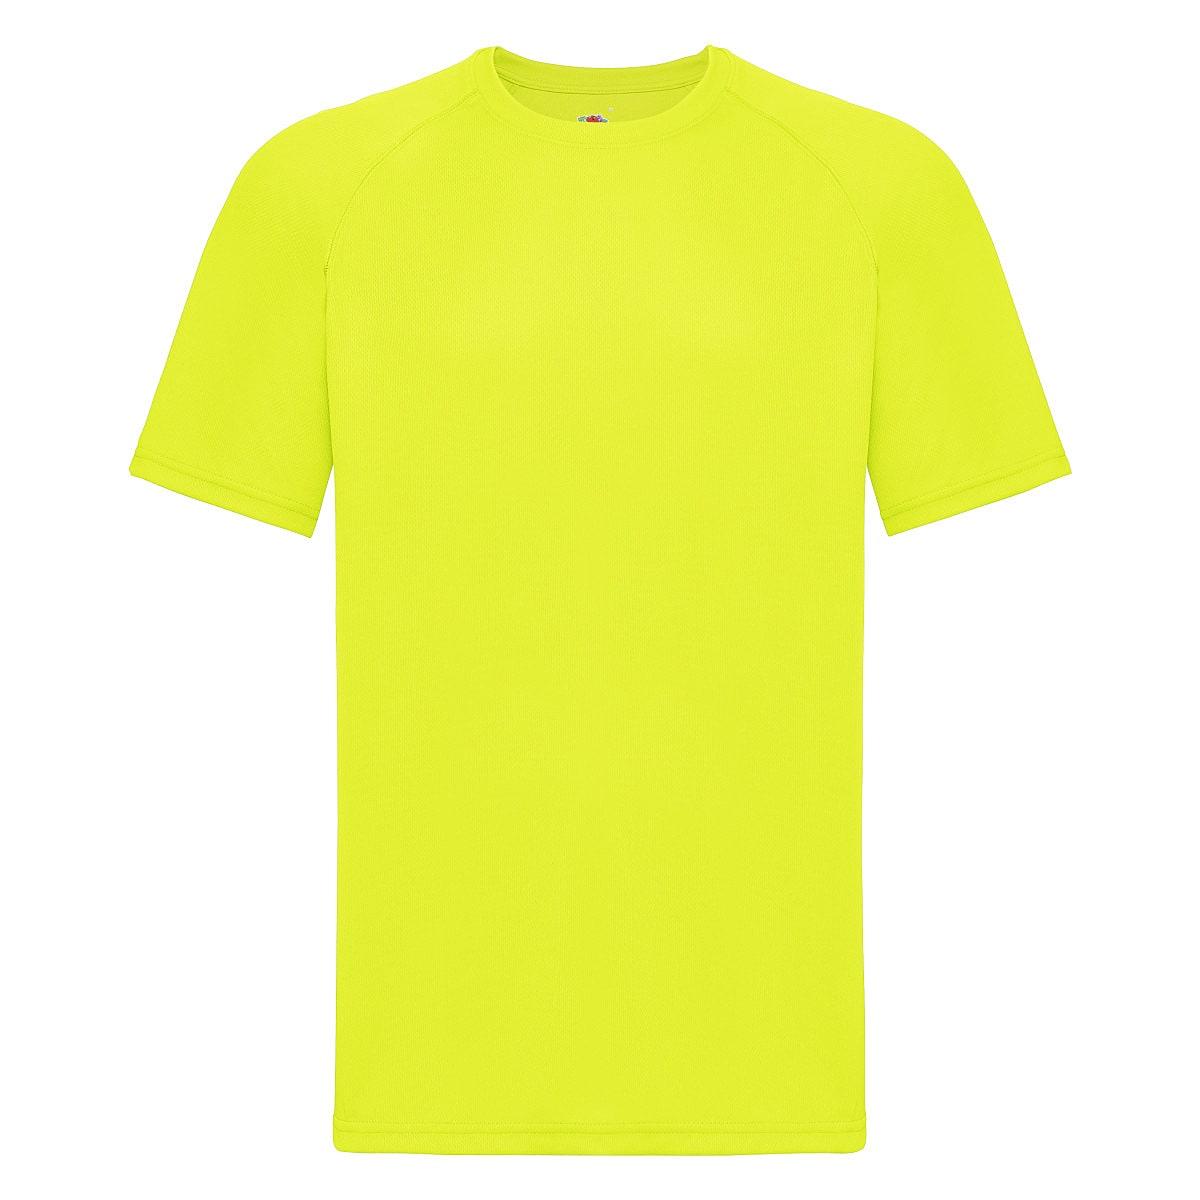 Fruit Of The Loom Mens Performance T-Shirt in Bright Yellow (Product Code: 61390)